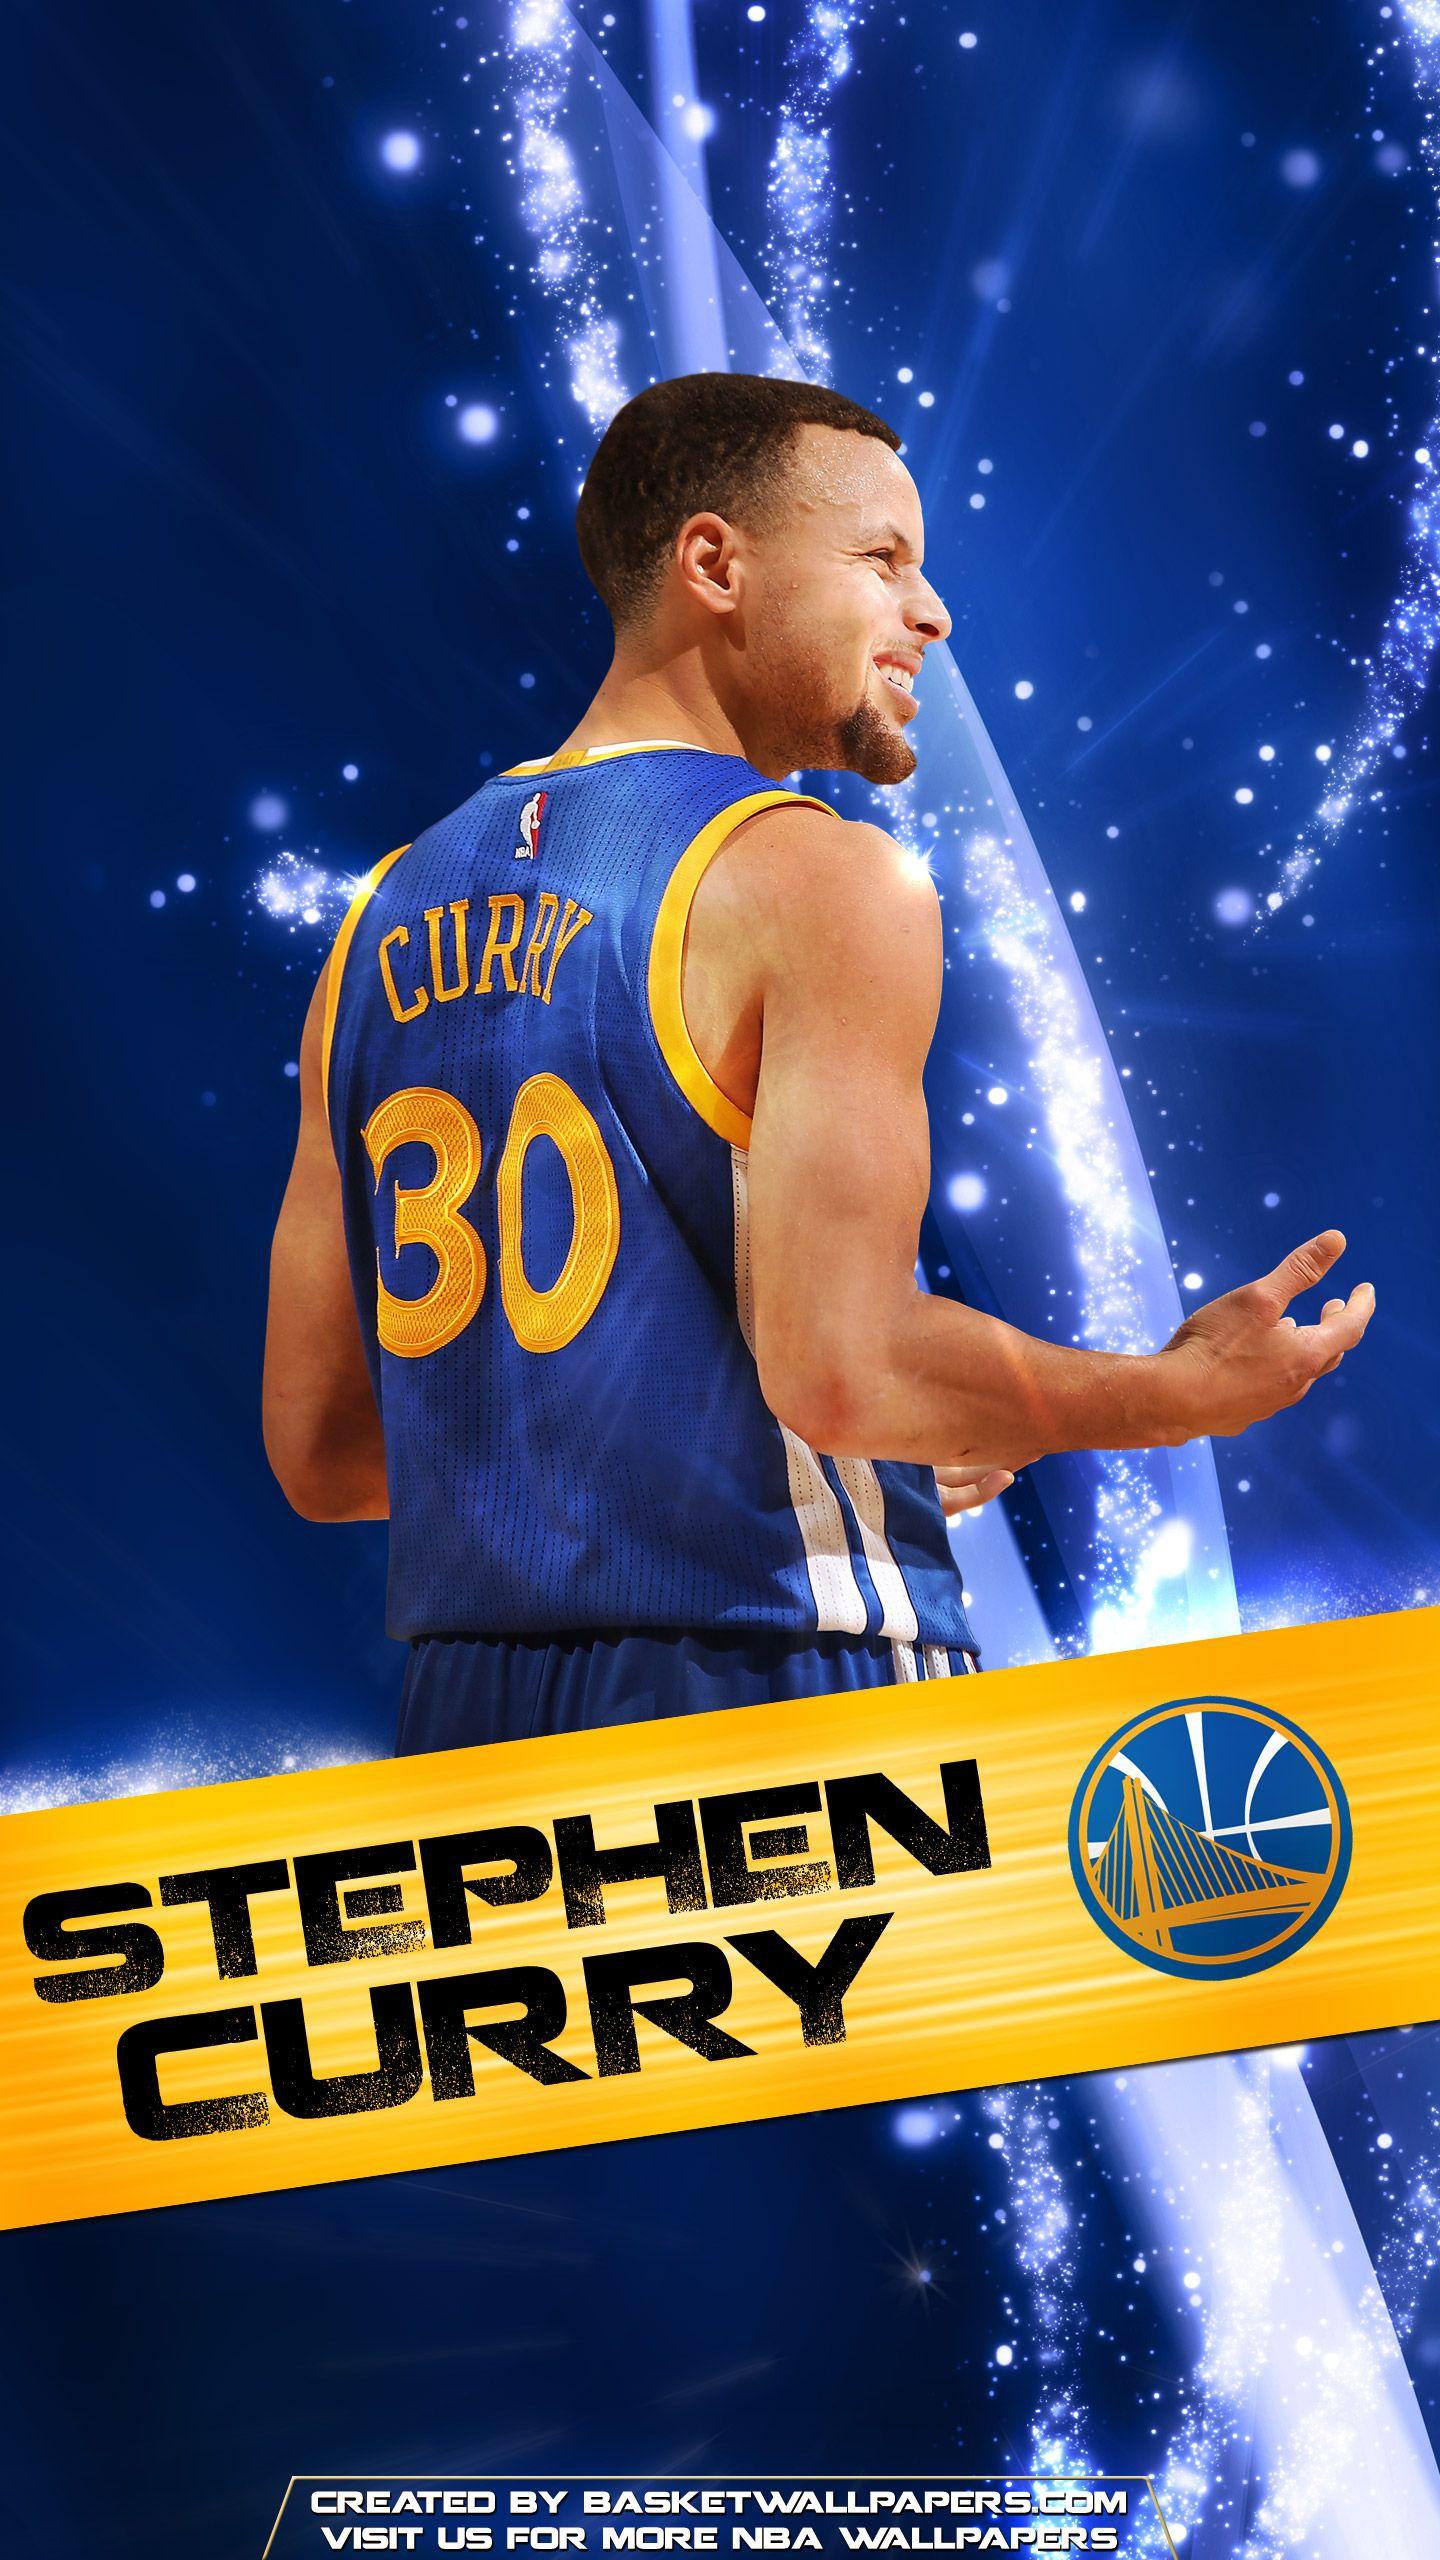 Stephen Curry Wallpaper for iPhone. Stephen curry